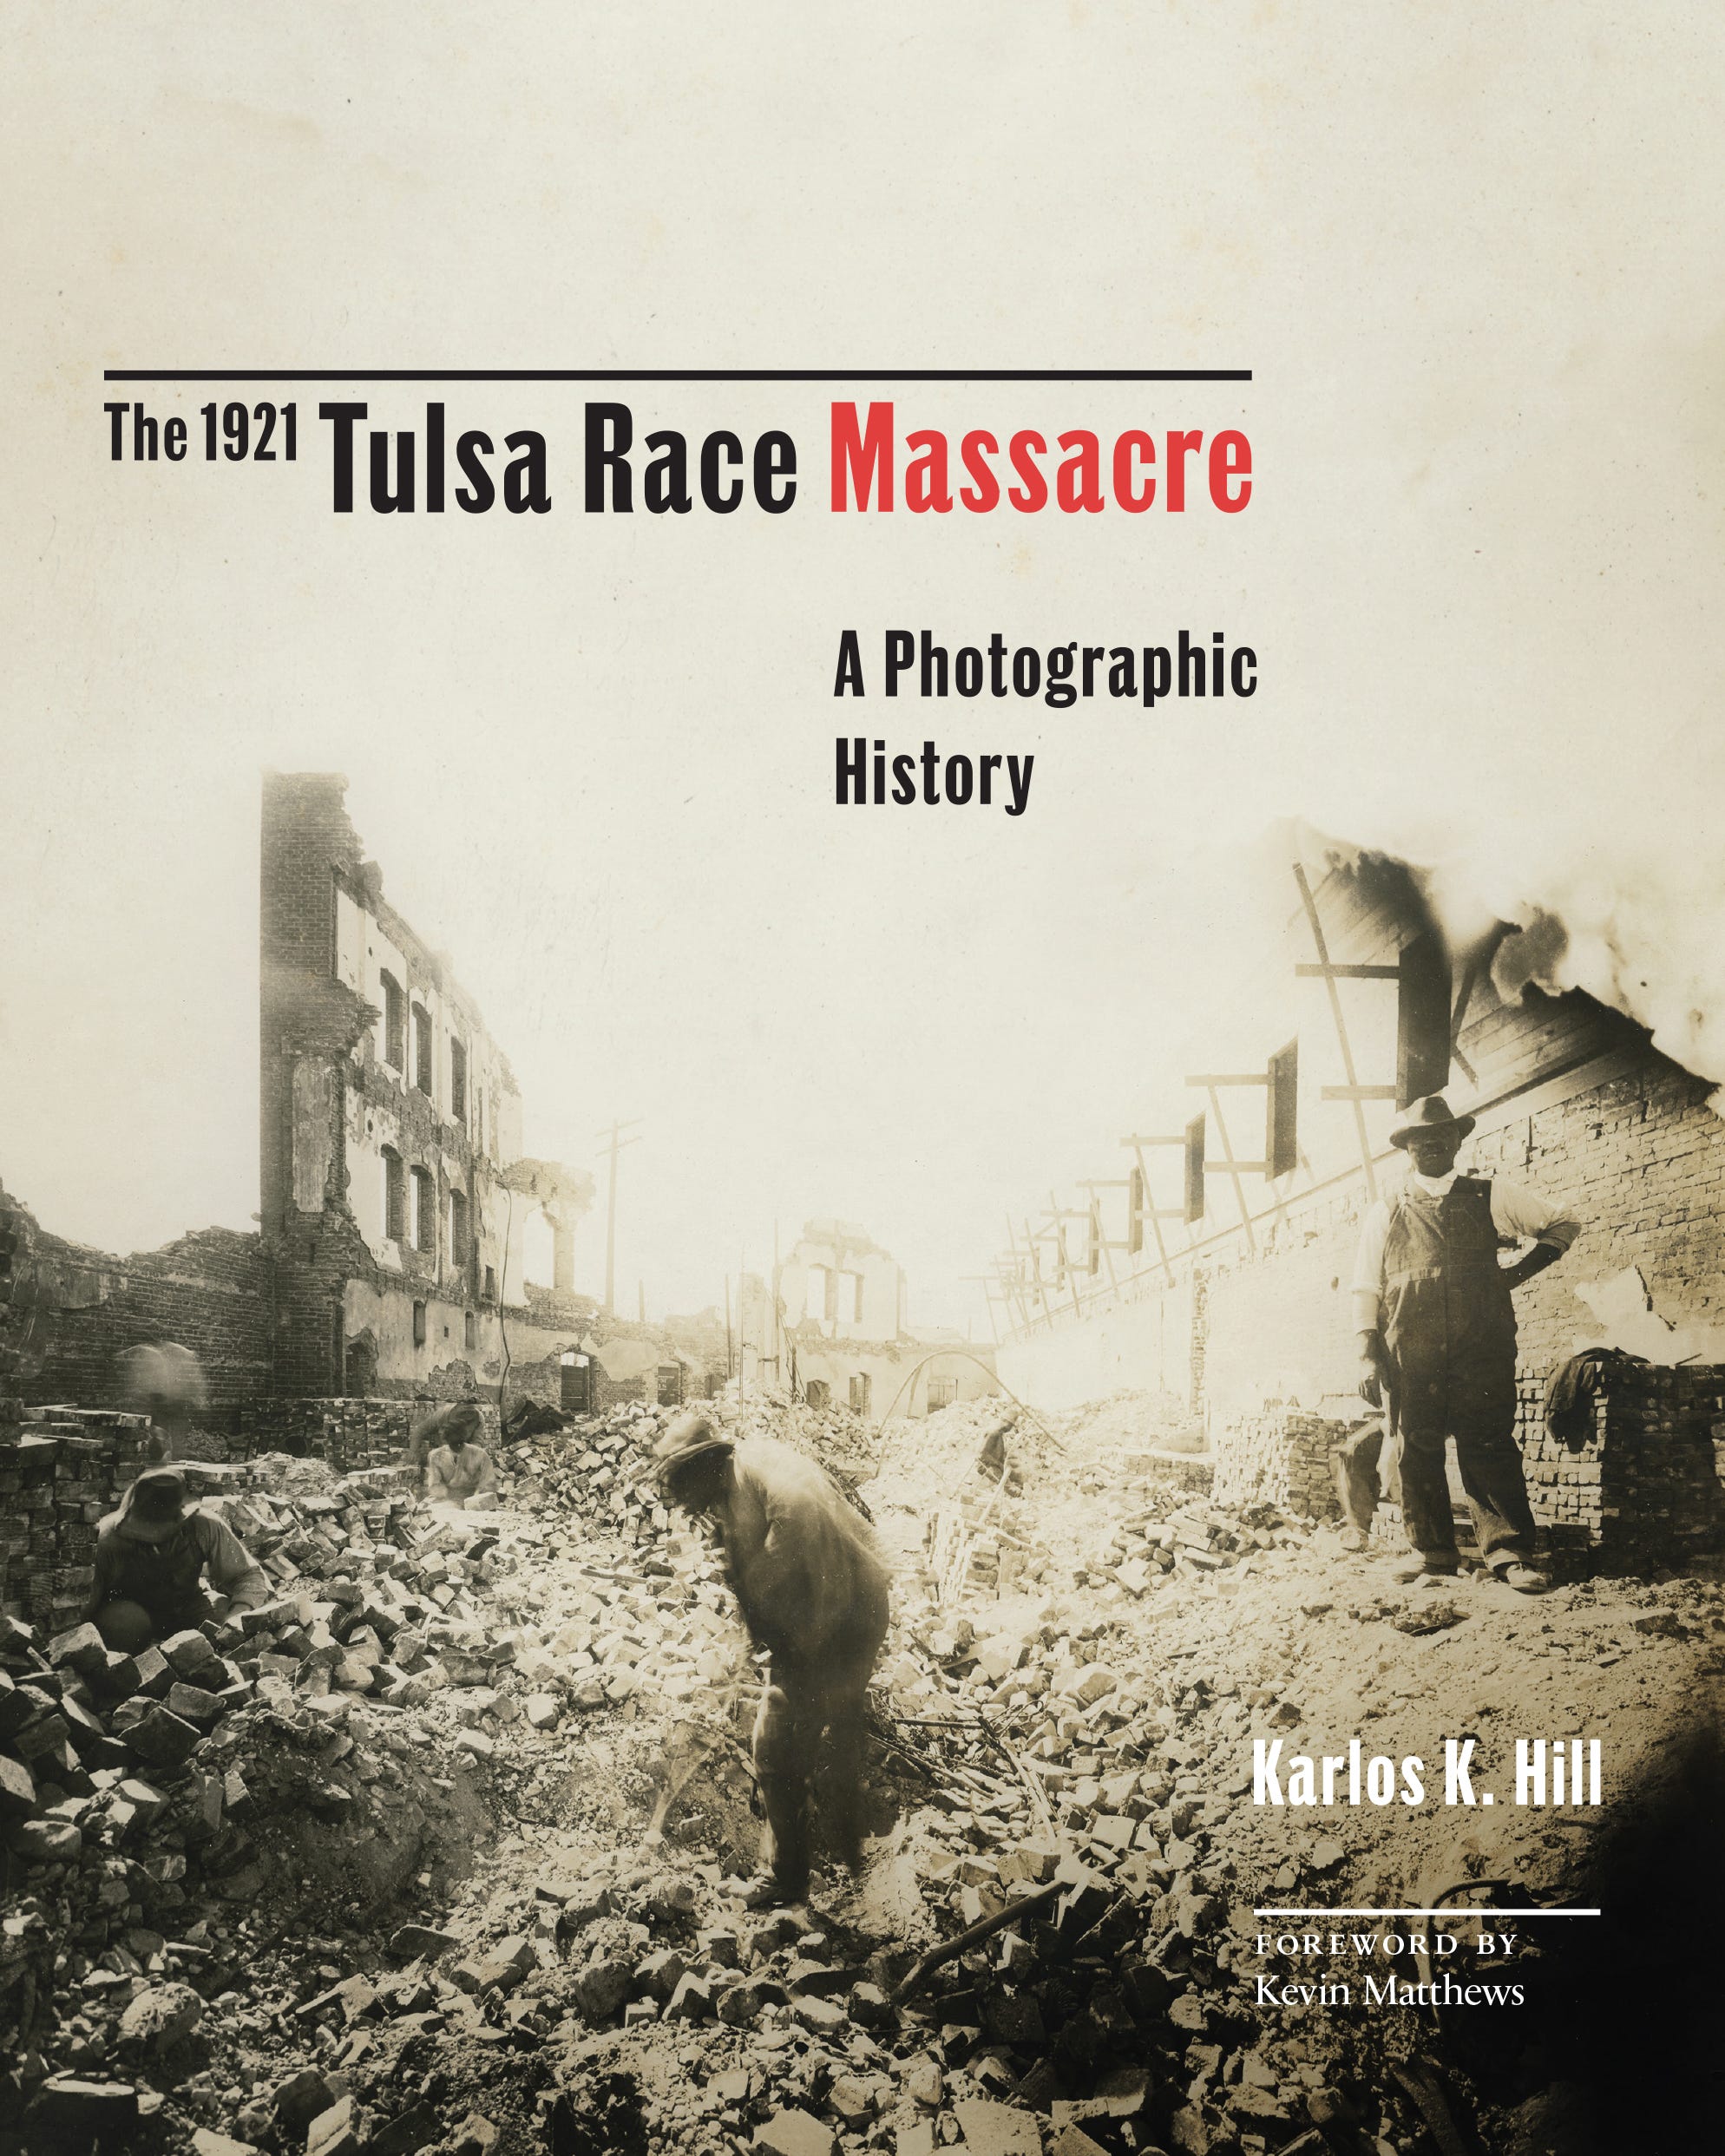 Karlos K. Hill, chair of the Clara Luper Department of African and African American Studies at the University of Oklahoma, released in March his new book "The 1921 Tulsa Race Massacre: A Photographic History."